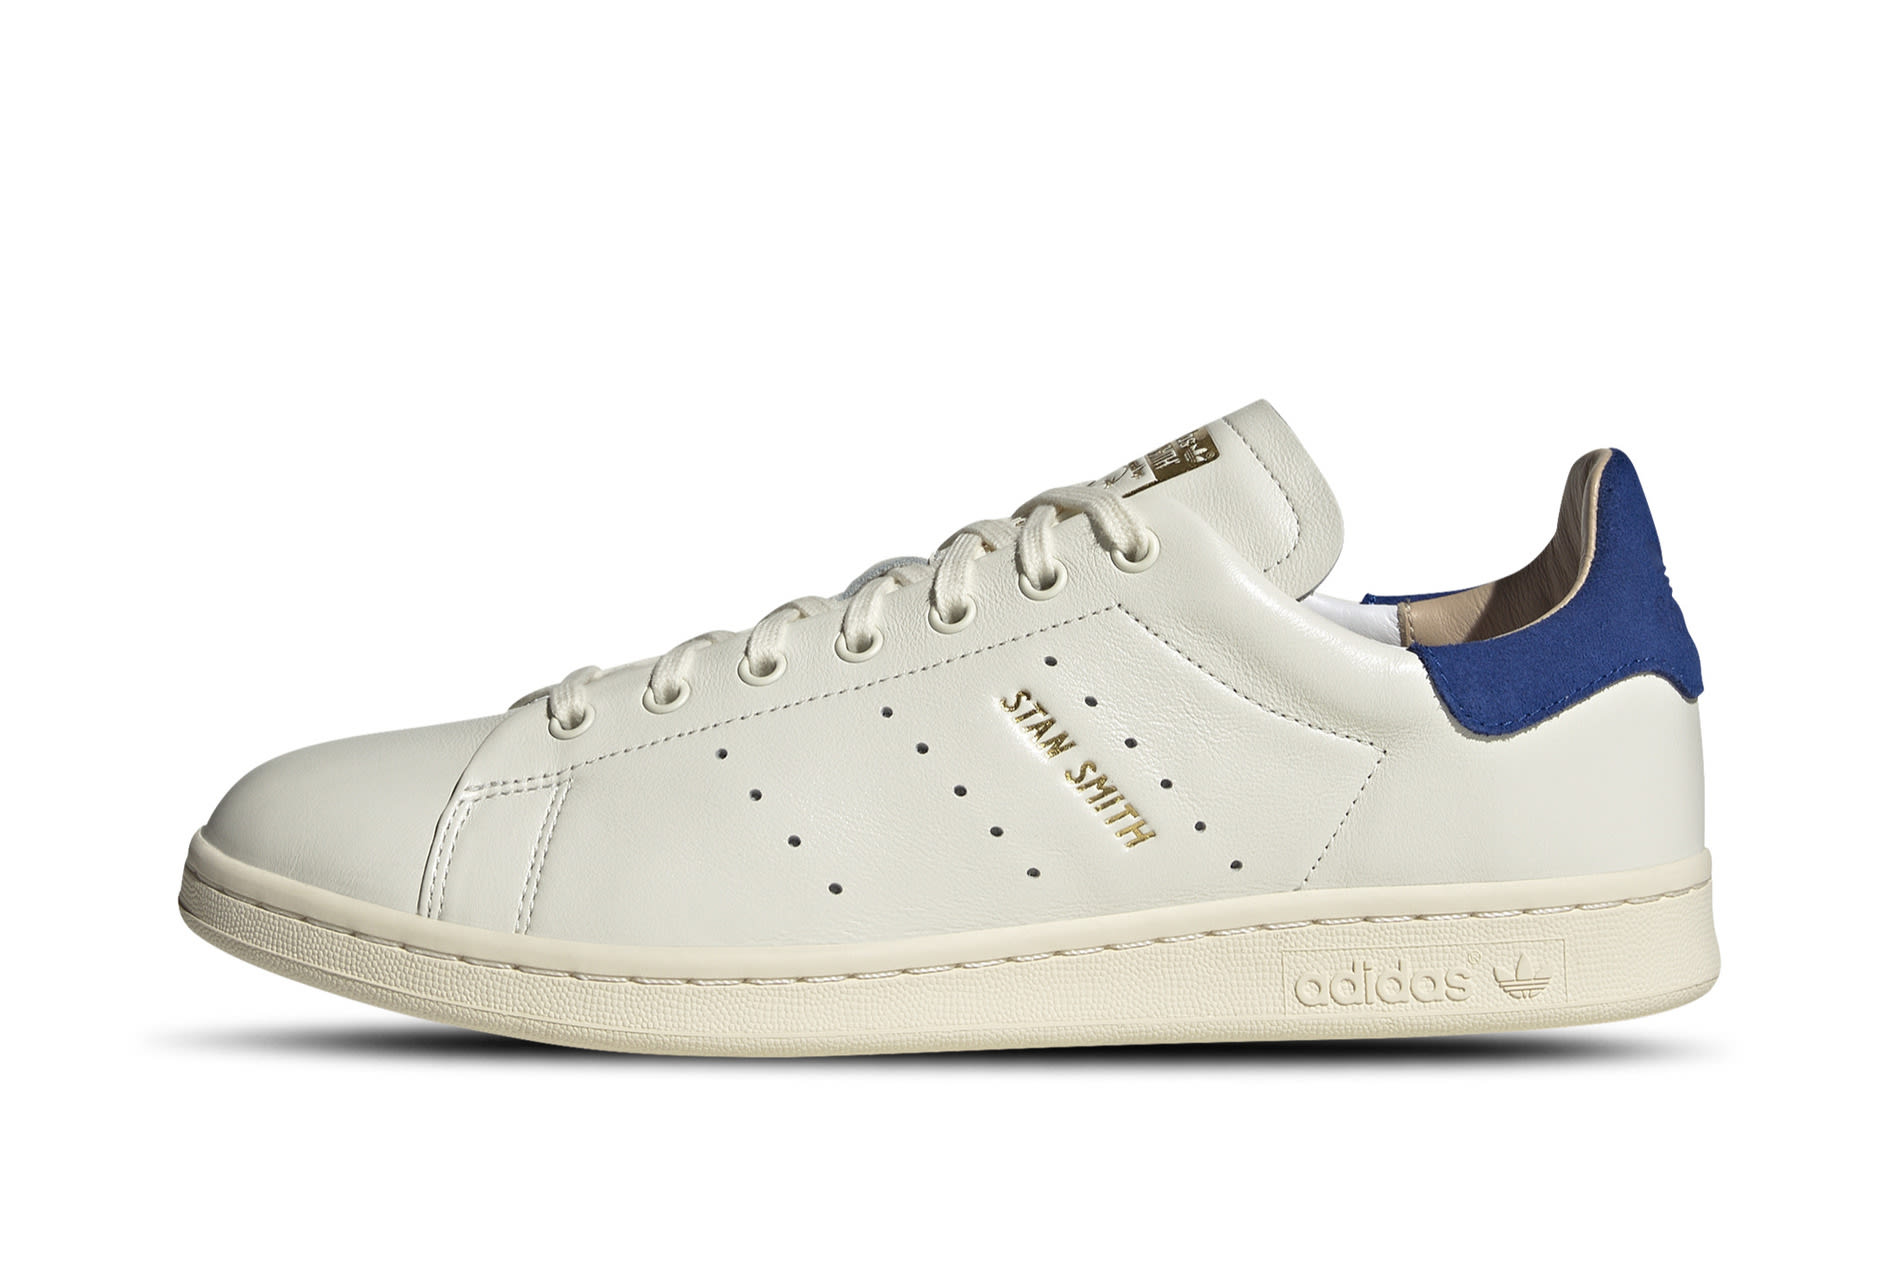 Adidas Stan Smith Leather Sock Limited Edition